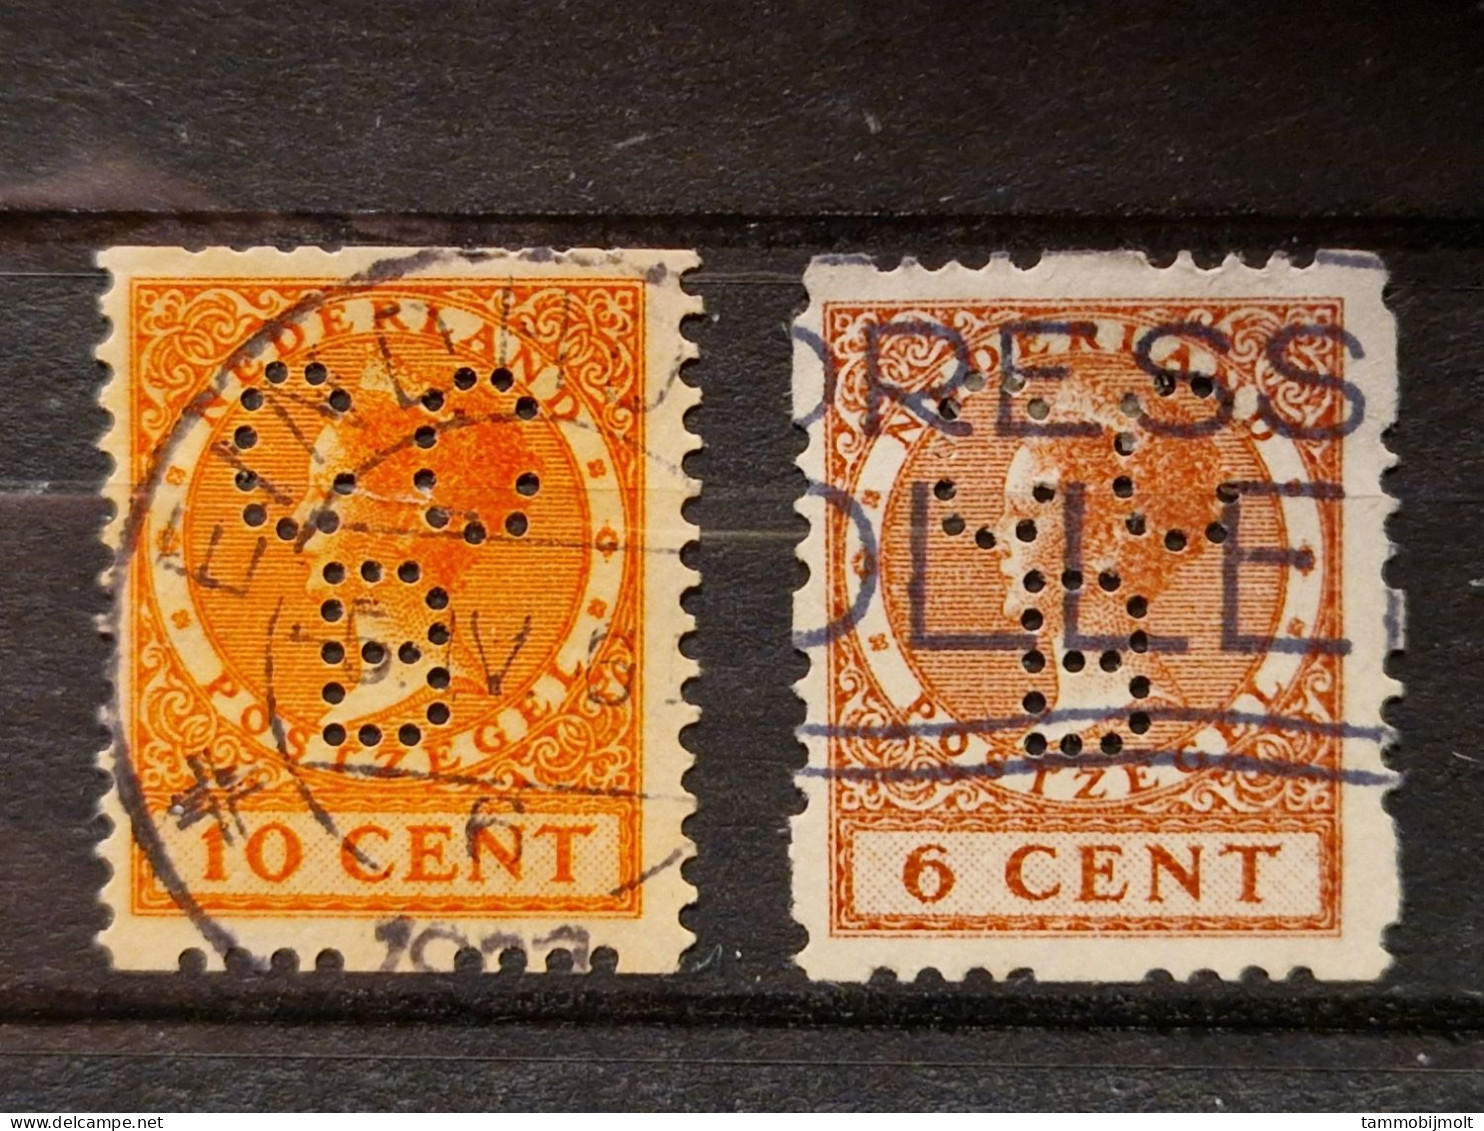 Netherlands, Nederland; Roltanding; POKO Perfins CCB; 2 Different Stamps - Unclassified